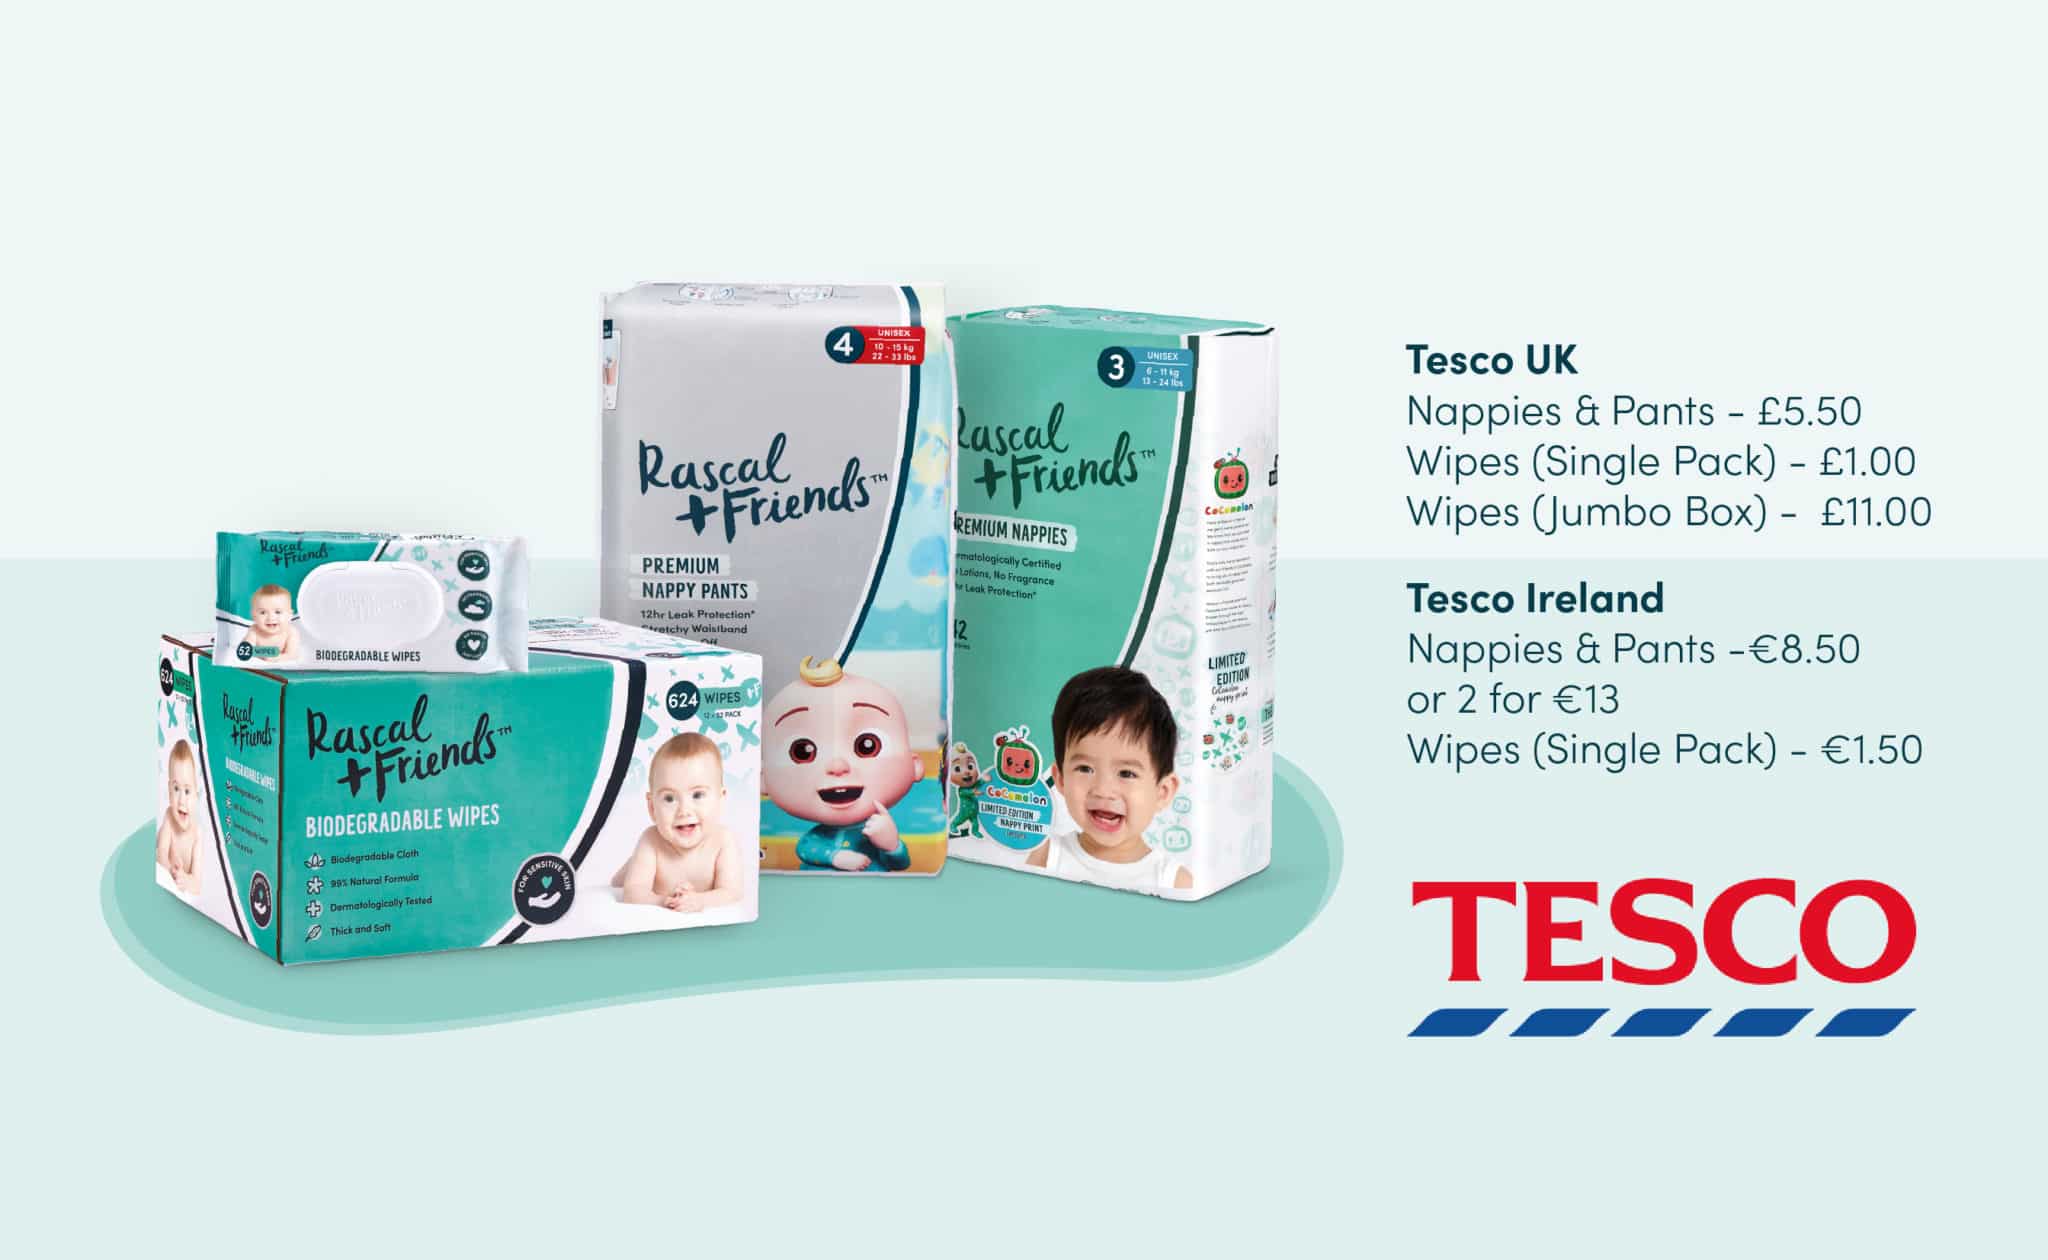 Buy Rascal + Friends from 5.50 Pounds at Tesco UK and 8.50 Euros at Tesco Ireland